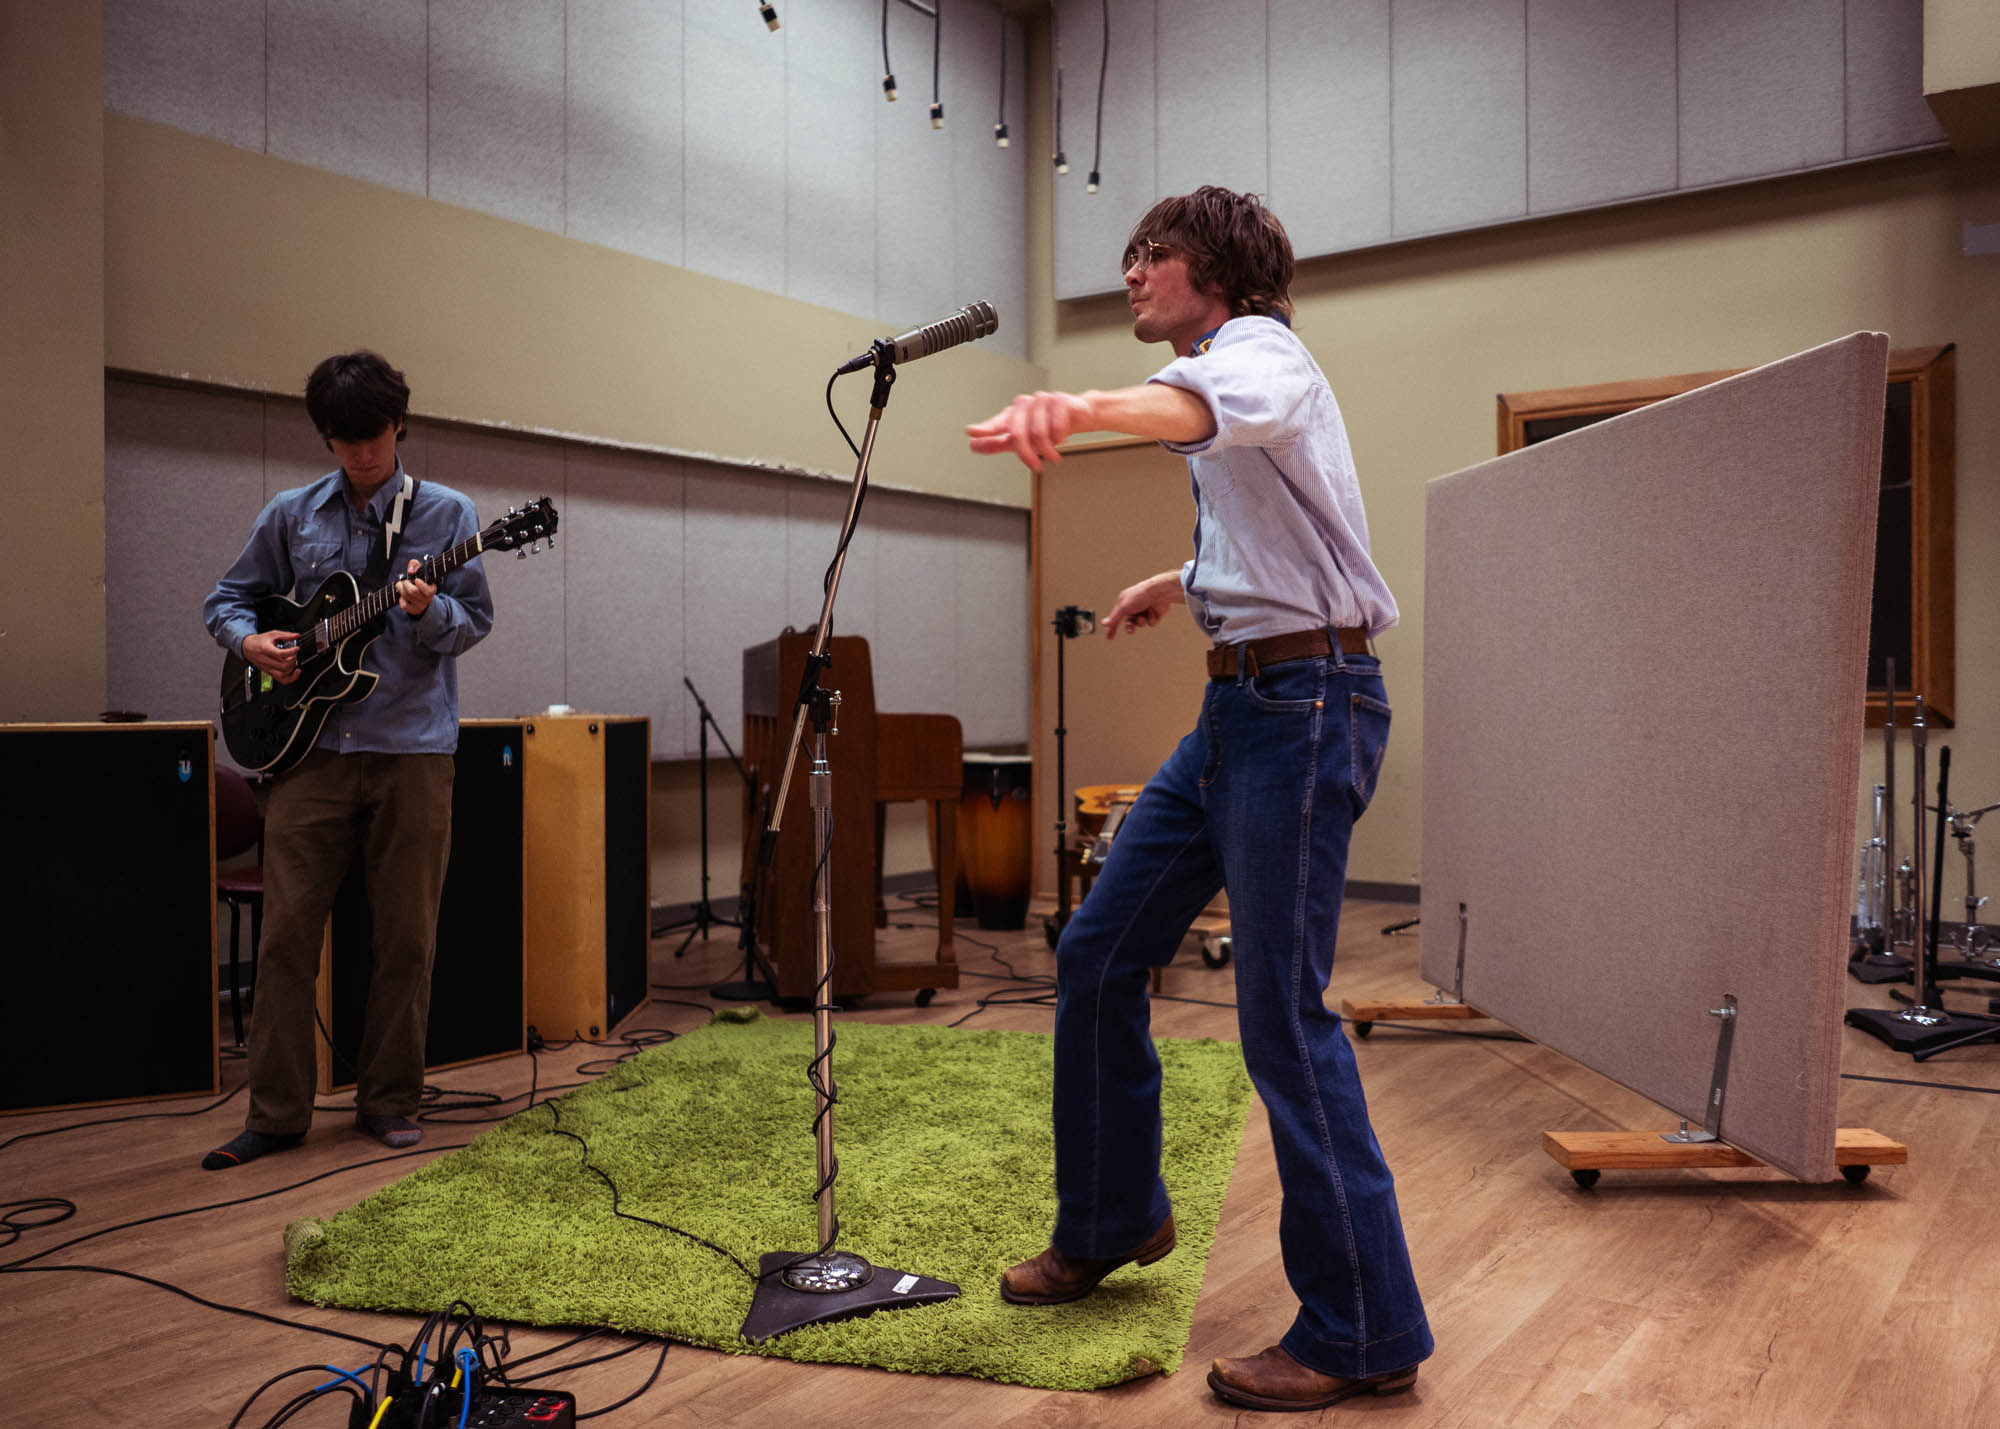 Dancing while singing a new song in the recording studio with the guitarist in the background